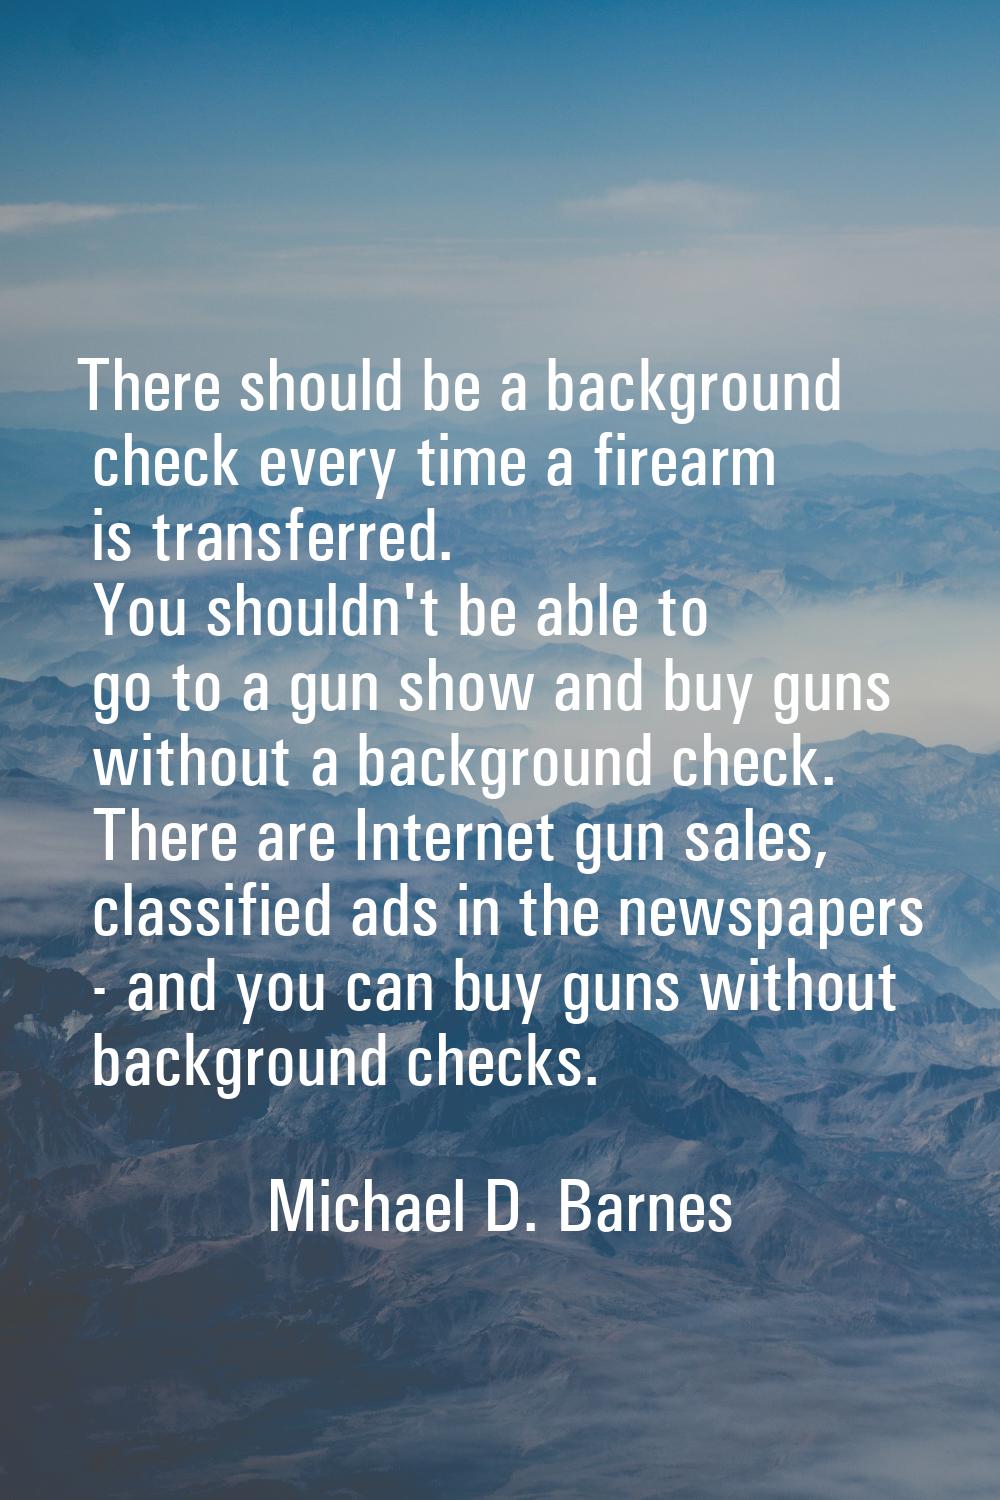 There should be a background check every time a firearm is transferred. You shouldn't be able to go